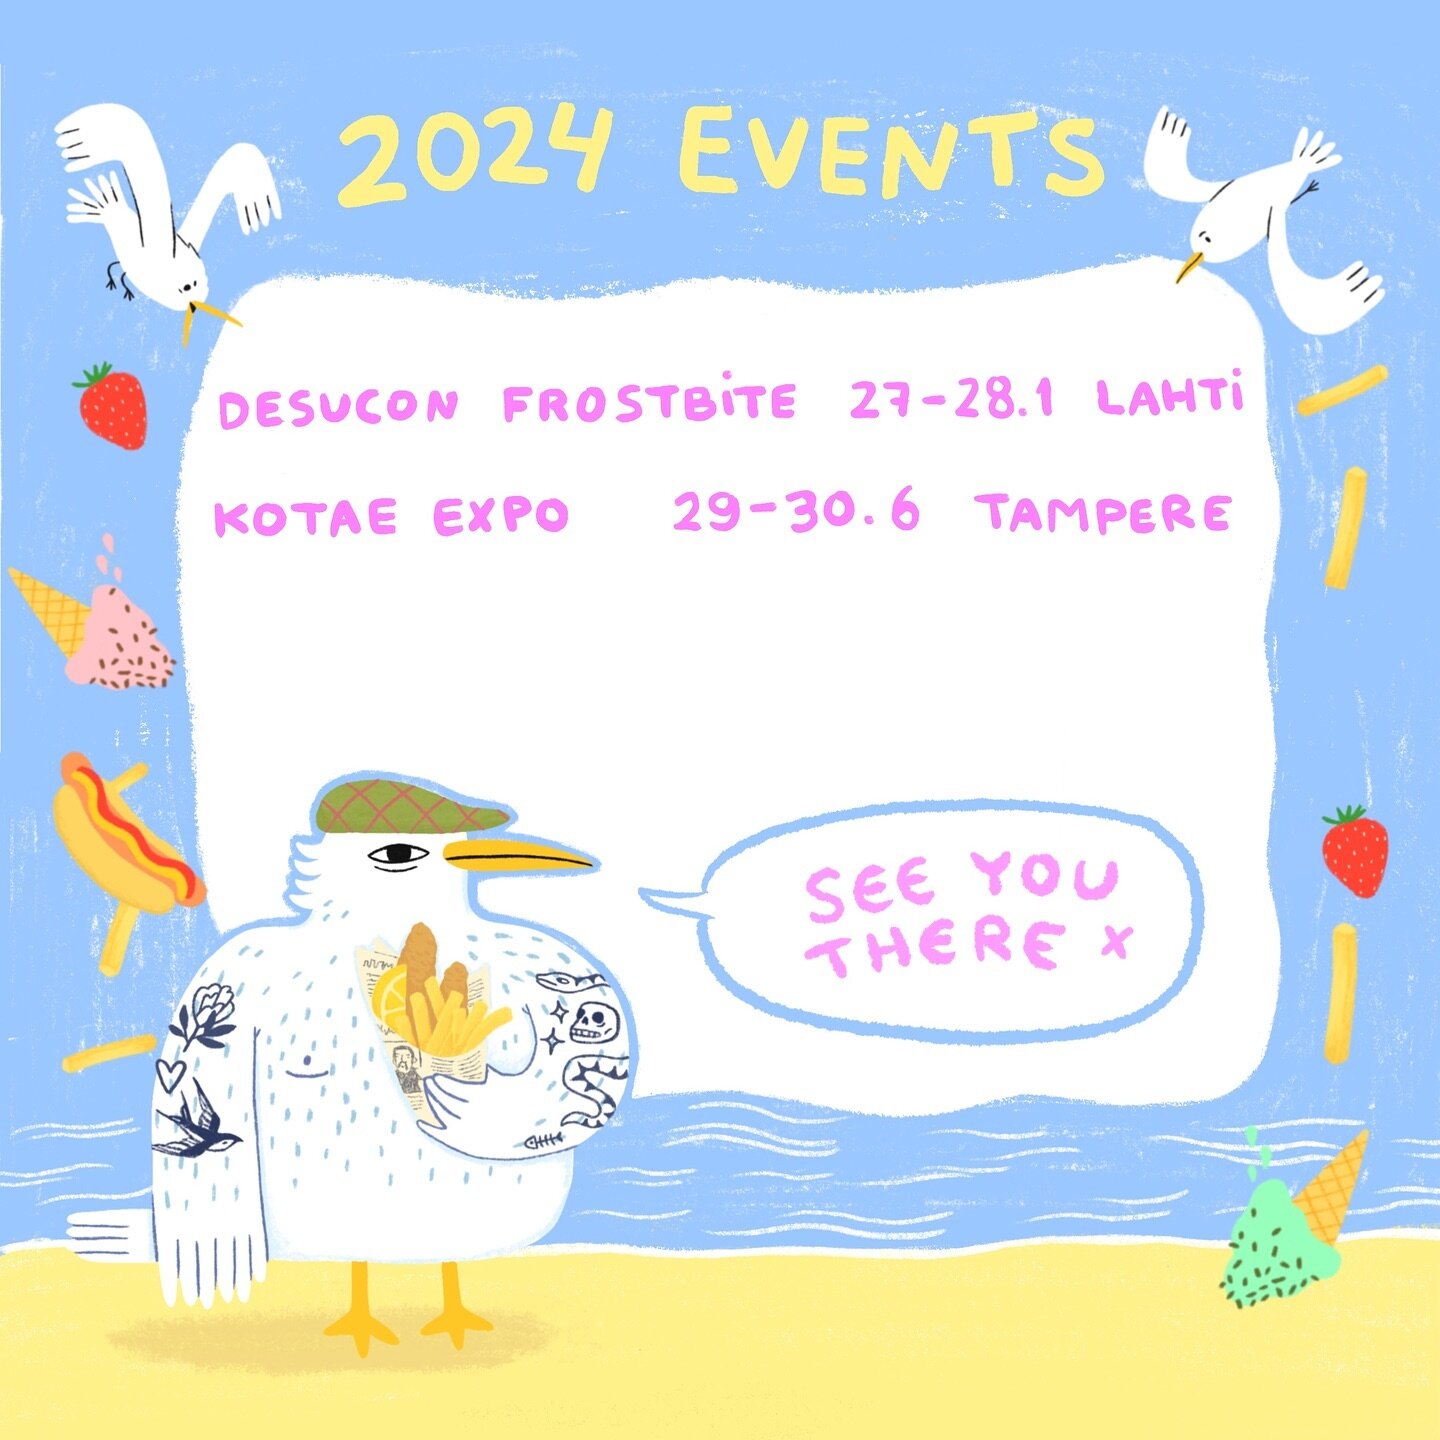 Booked events for 2024 and time to change to my summer frame 😁

Looking pretty empty at the moment but I am planning to book more as we move closer to spring and summer and I will keep updating this schedule 🌞

Also, please feel free to let me know